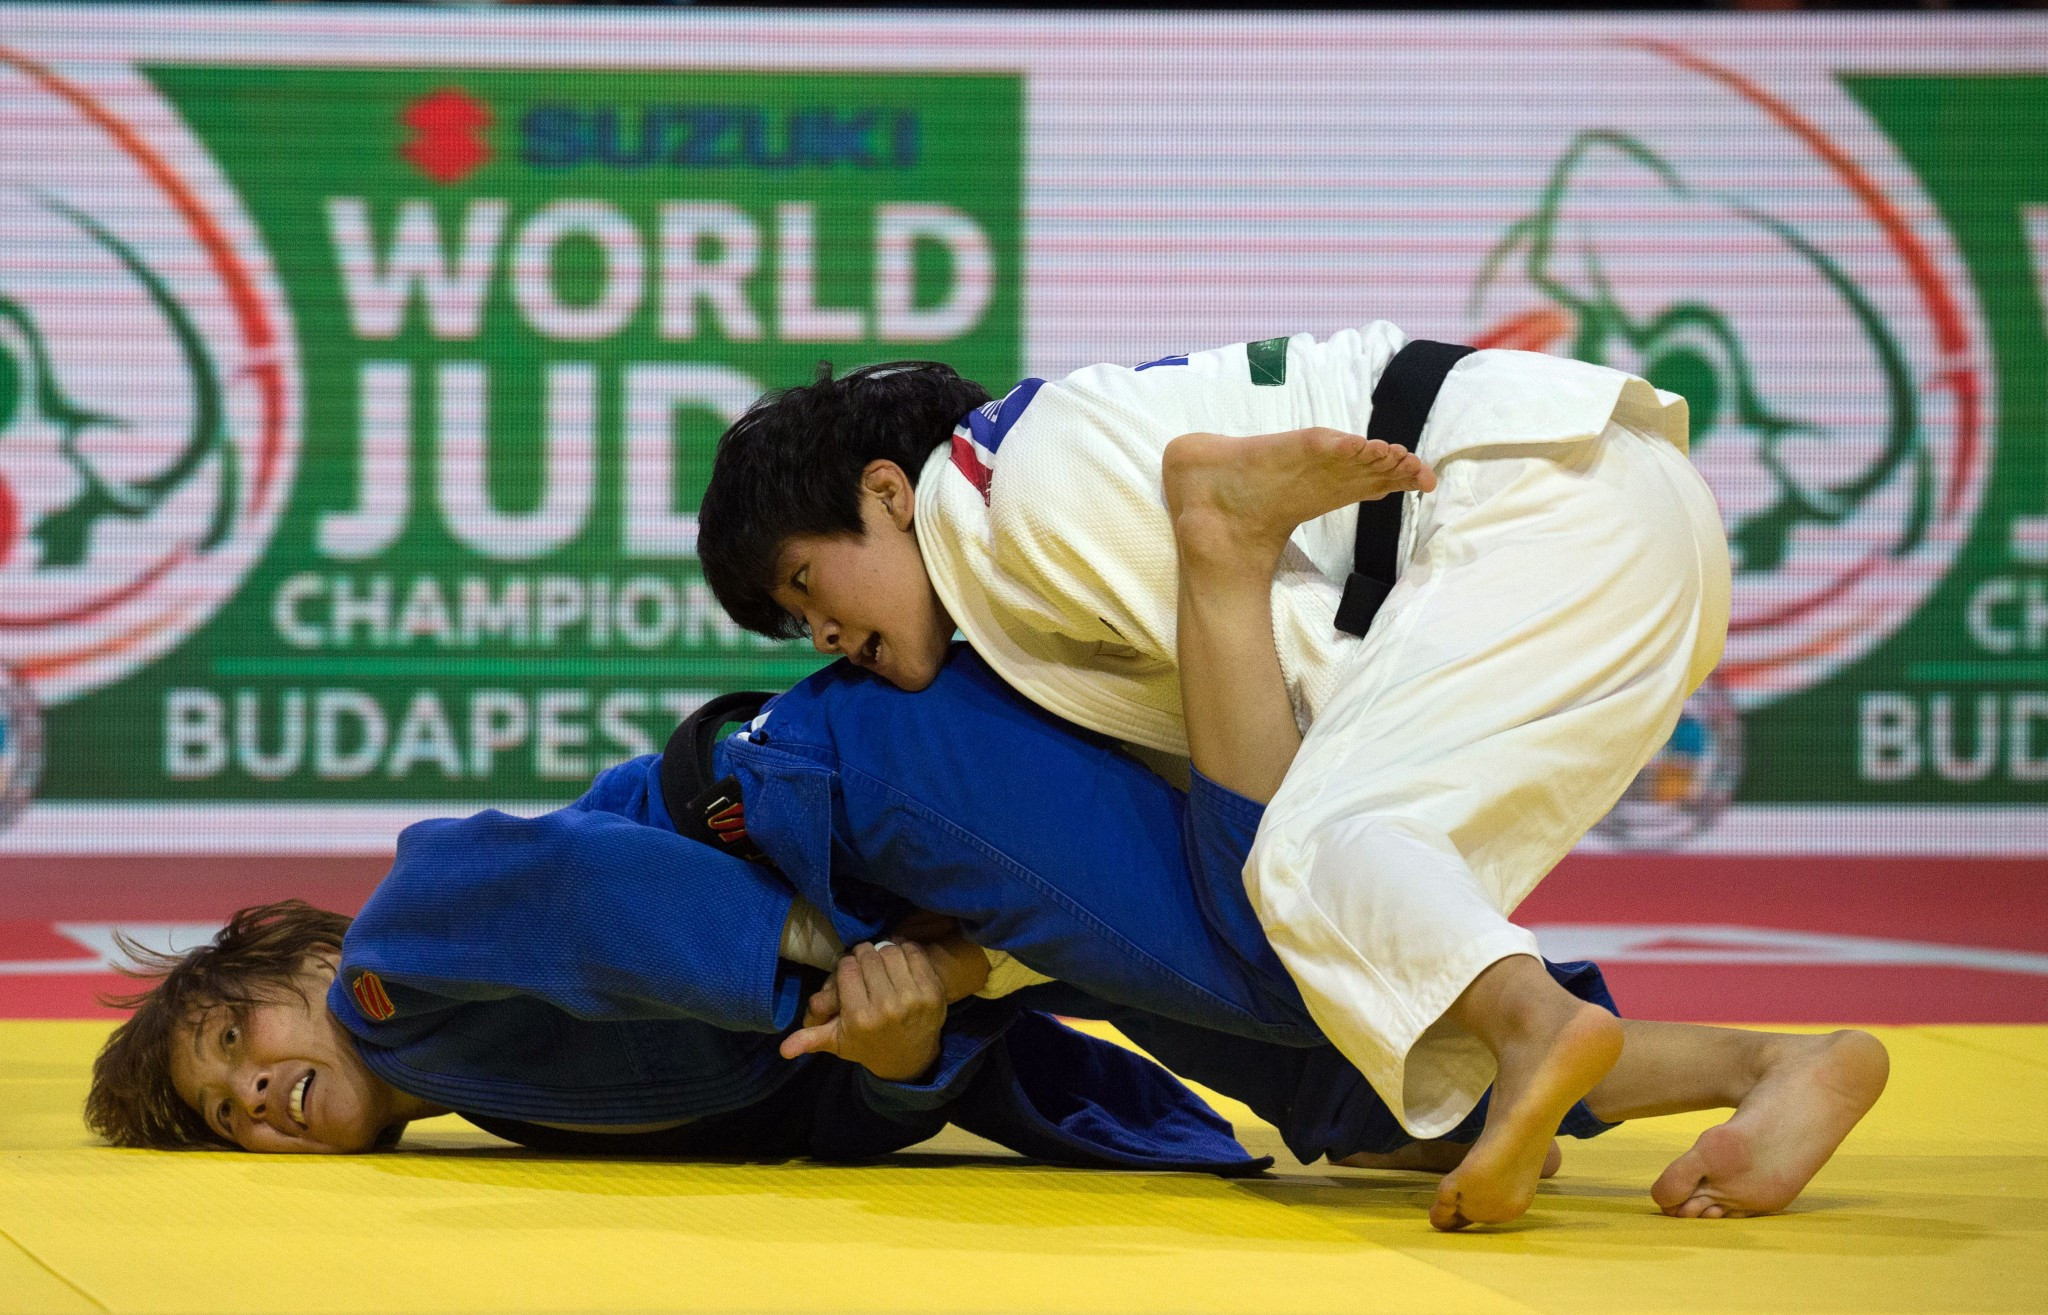 Funa Tonaki of Japan was considered a surprise winner of the under 48kg event ©Getty Images